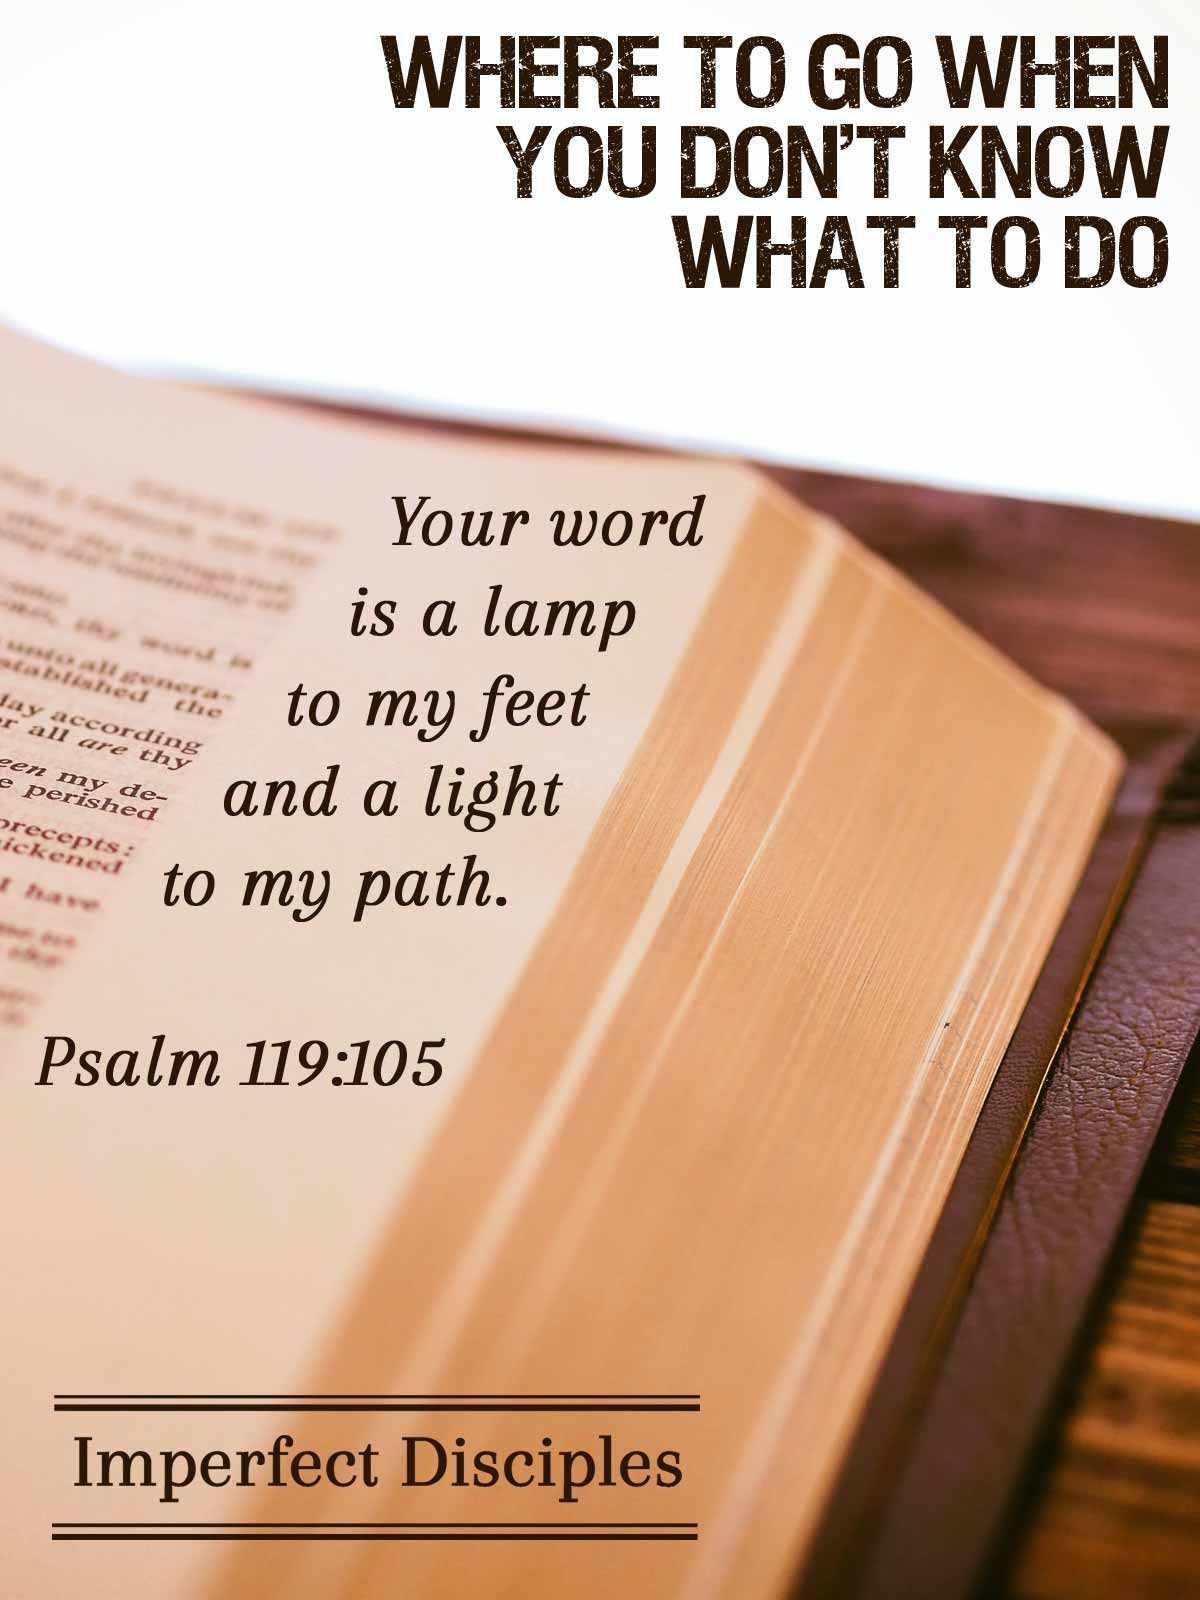 Where to go when you don't know what to do. Psalm 119:105